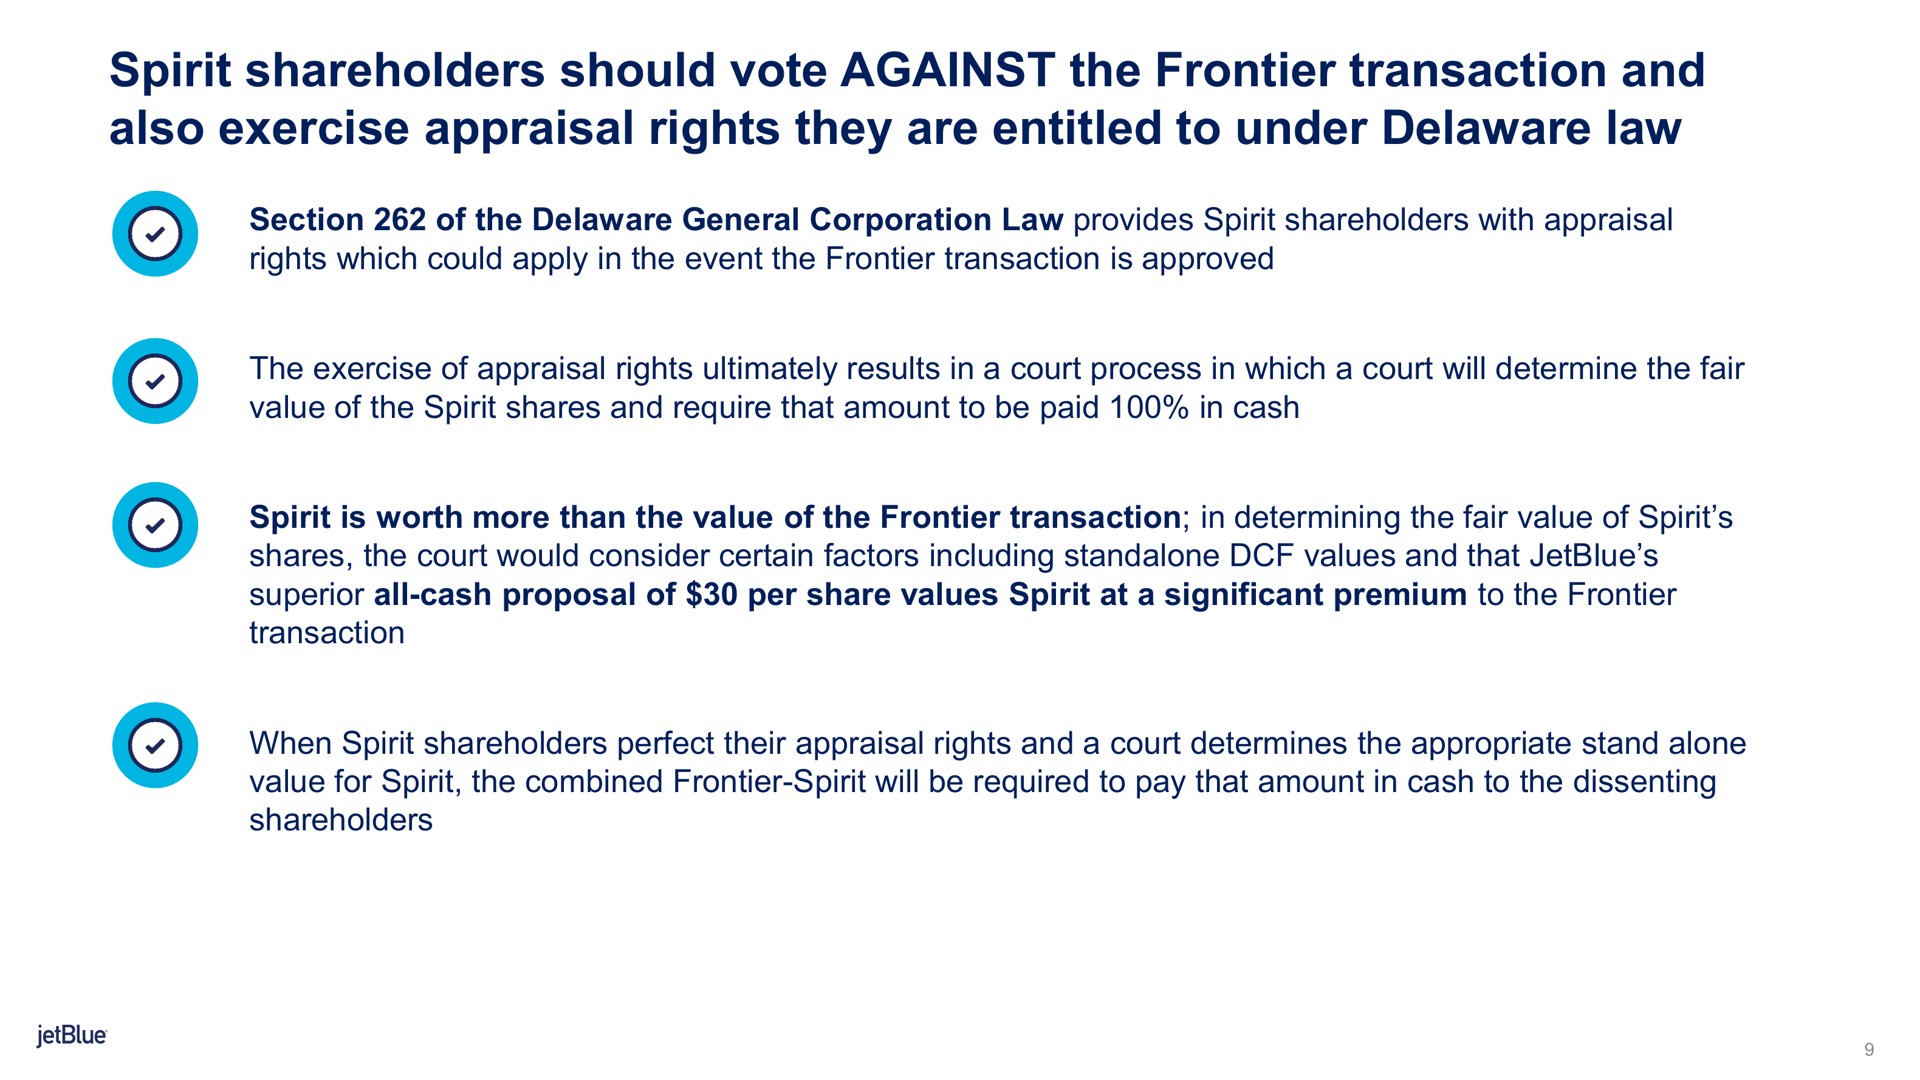 spirit shareholders should vote against the frontier transaction and also exercise appraisal rights they are entitled to under law | jetBlue